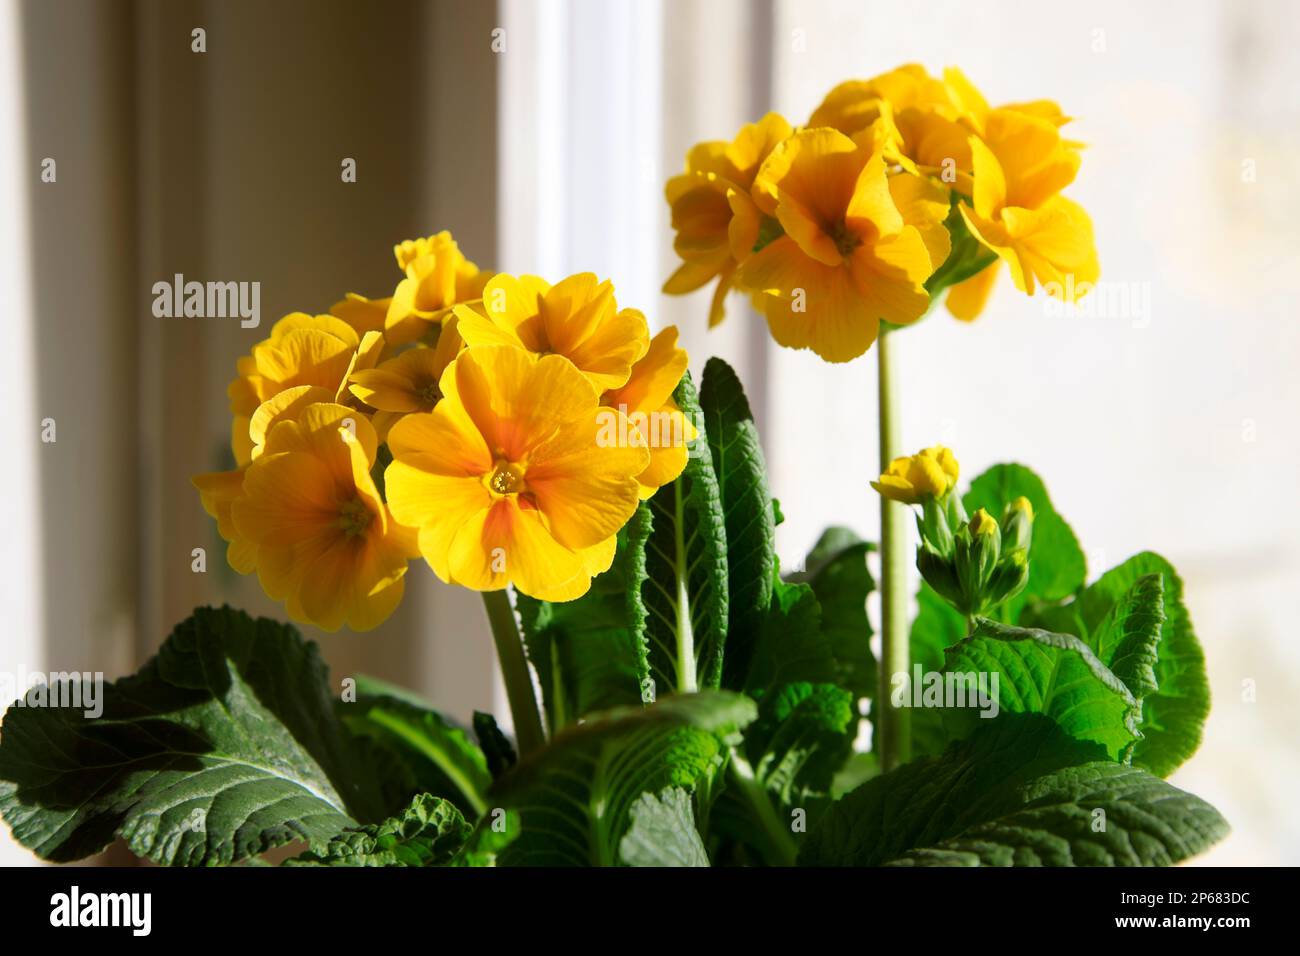 Primula elatior, golden yellow spring flowers indoors. Primrose flower head close-up with green leaves, spring potted plant. Stock Photo